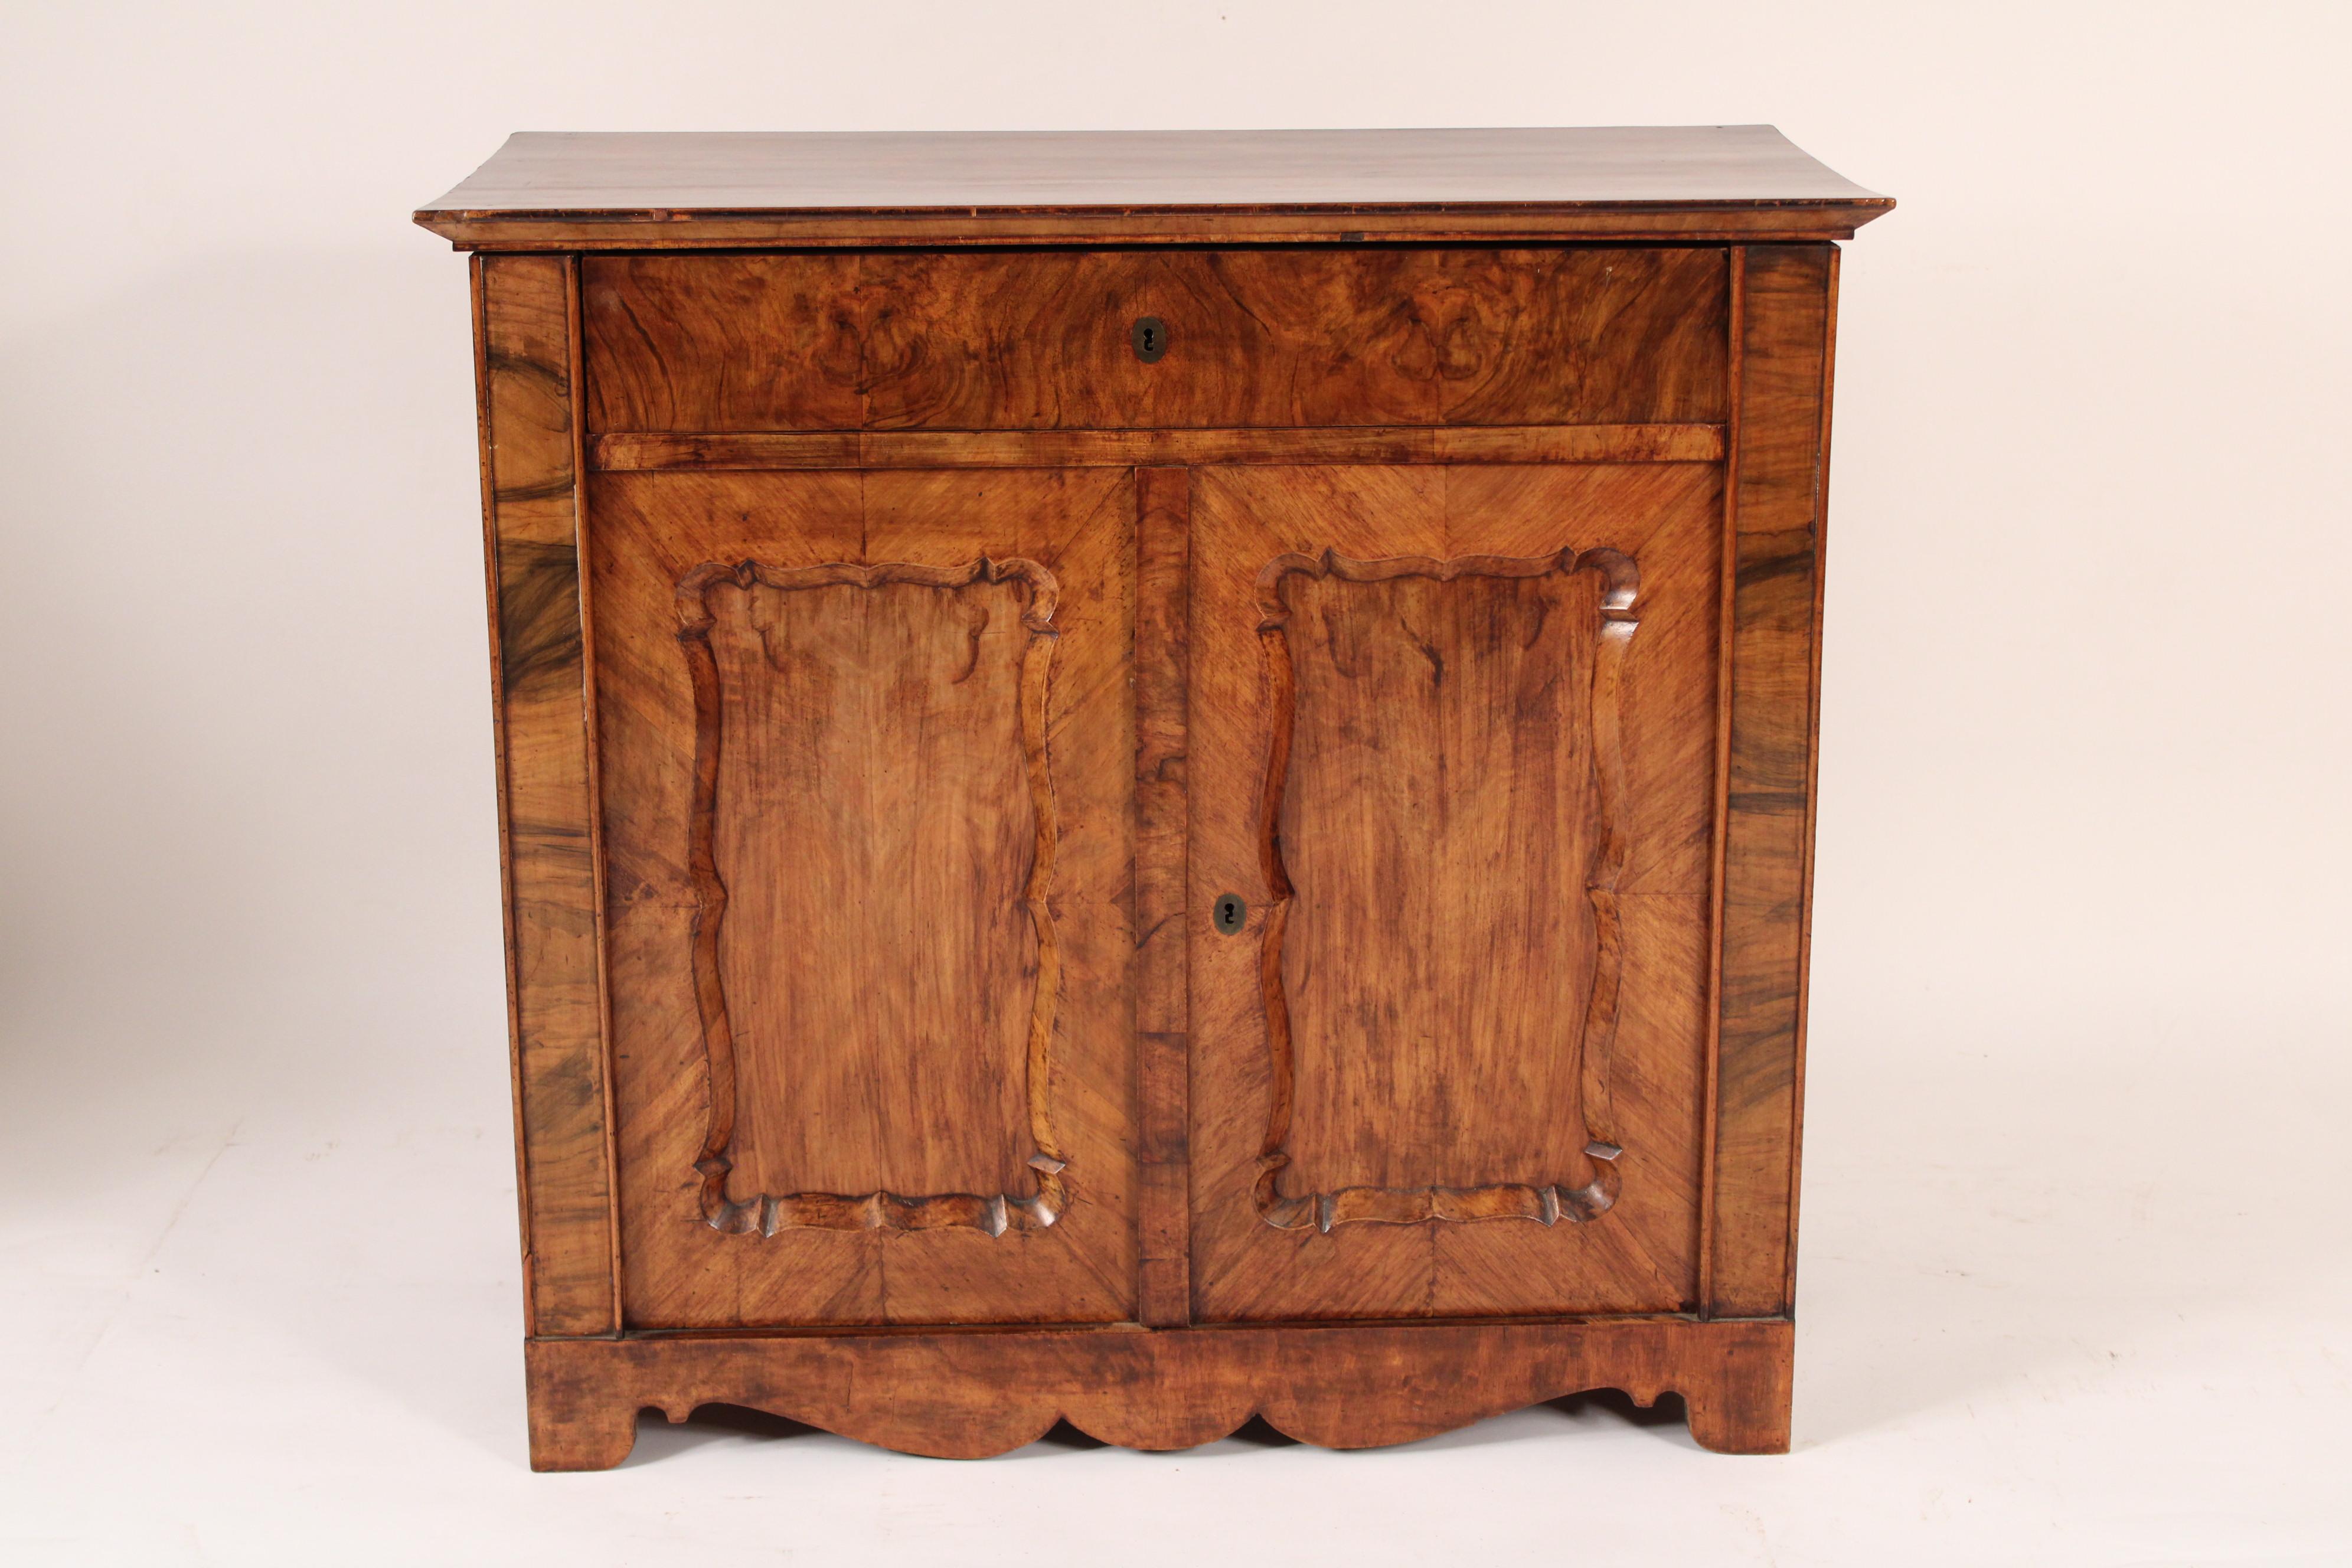 Napoleon III burl walnut, birch and grain painted cabinet, circa 1860. With a burl walnut over hanging top, a burl walnut drawer, two doors with walnut chamfred scalloped frames inset with grain painted birch panels, grain painted sides and